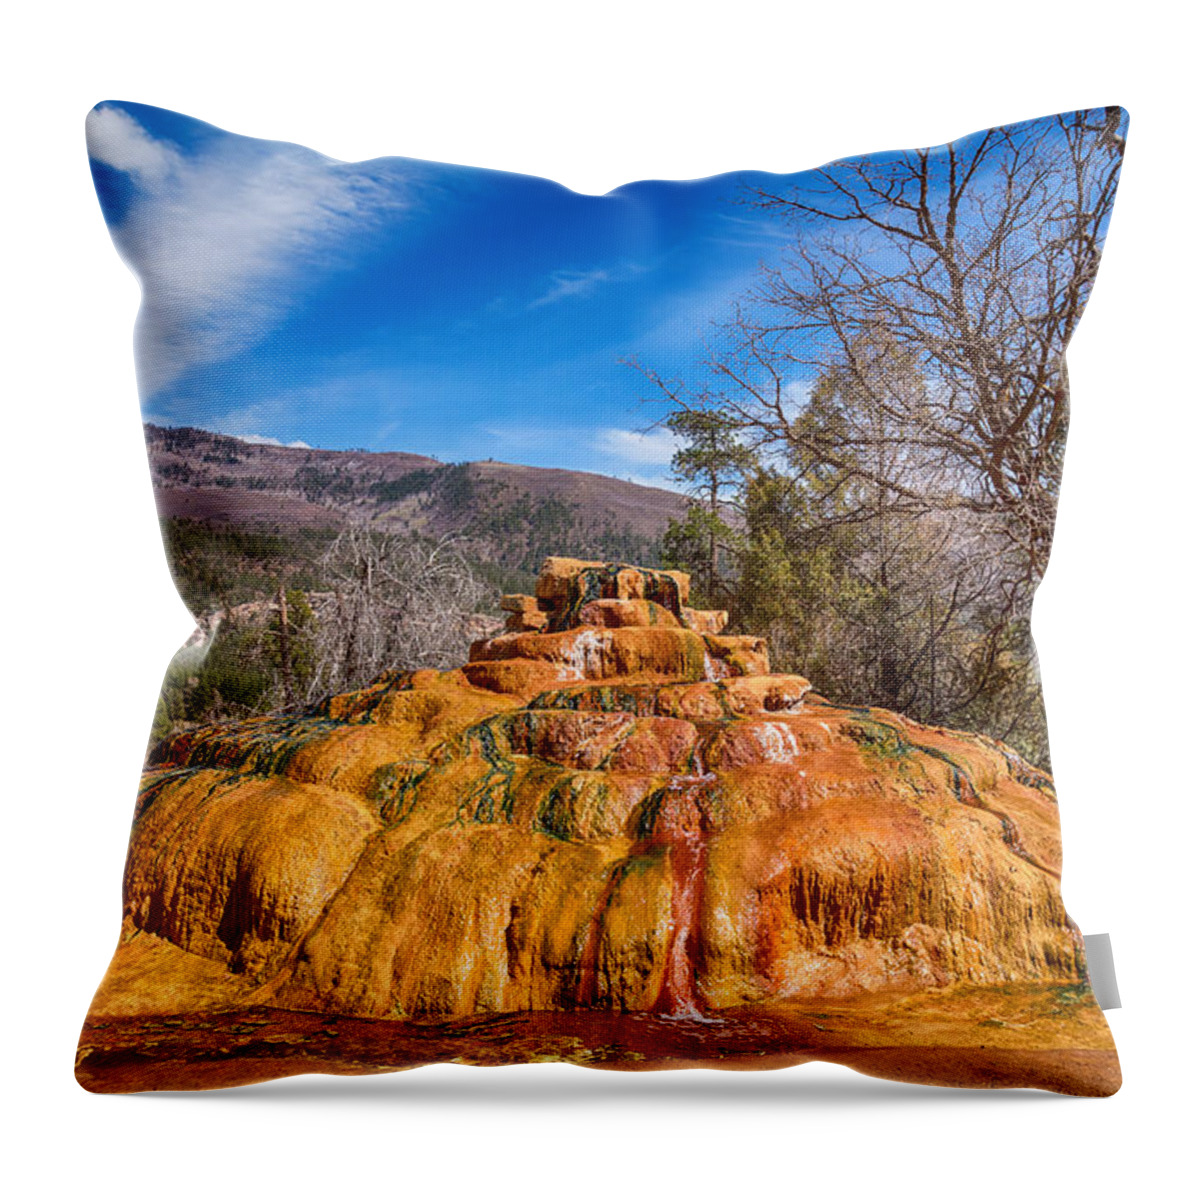 Pinkerton Hot Spring Throw Pillow featuring the photograph Pinkerton Hot Spring Formation by James BO Insogna